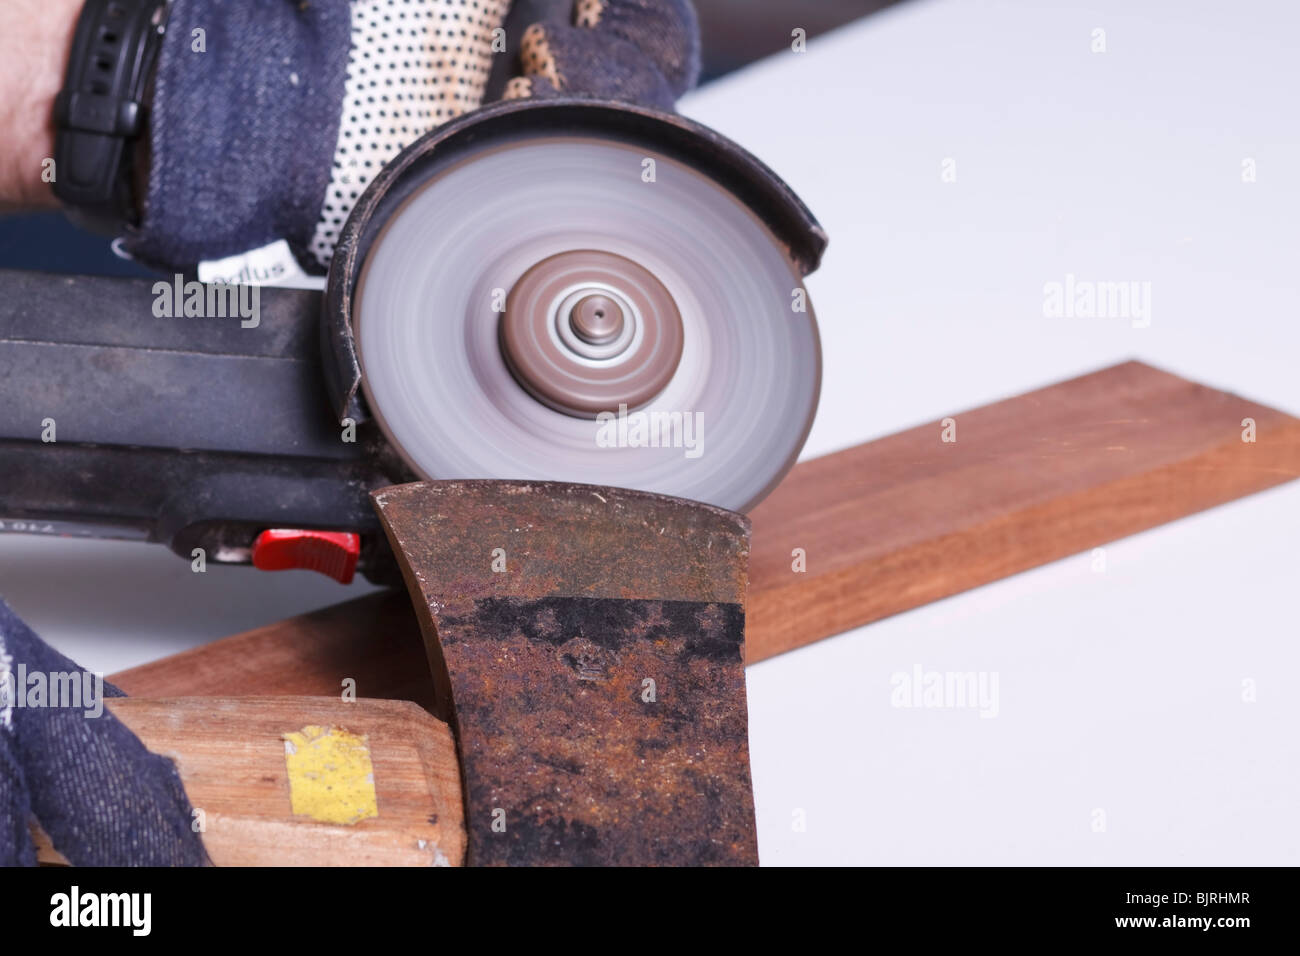 https://c8.alamy.com/comp/BJRHMR/an-angle-grinder-being-used-to-sharpen-the-blade-of-an-axe-BJRHMR.jpg